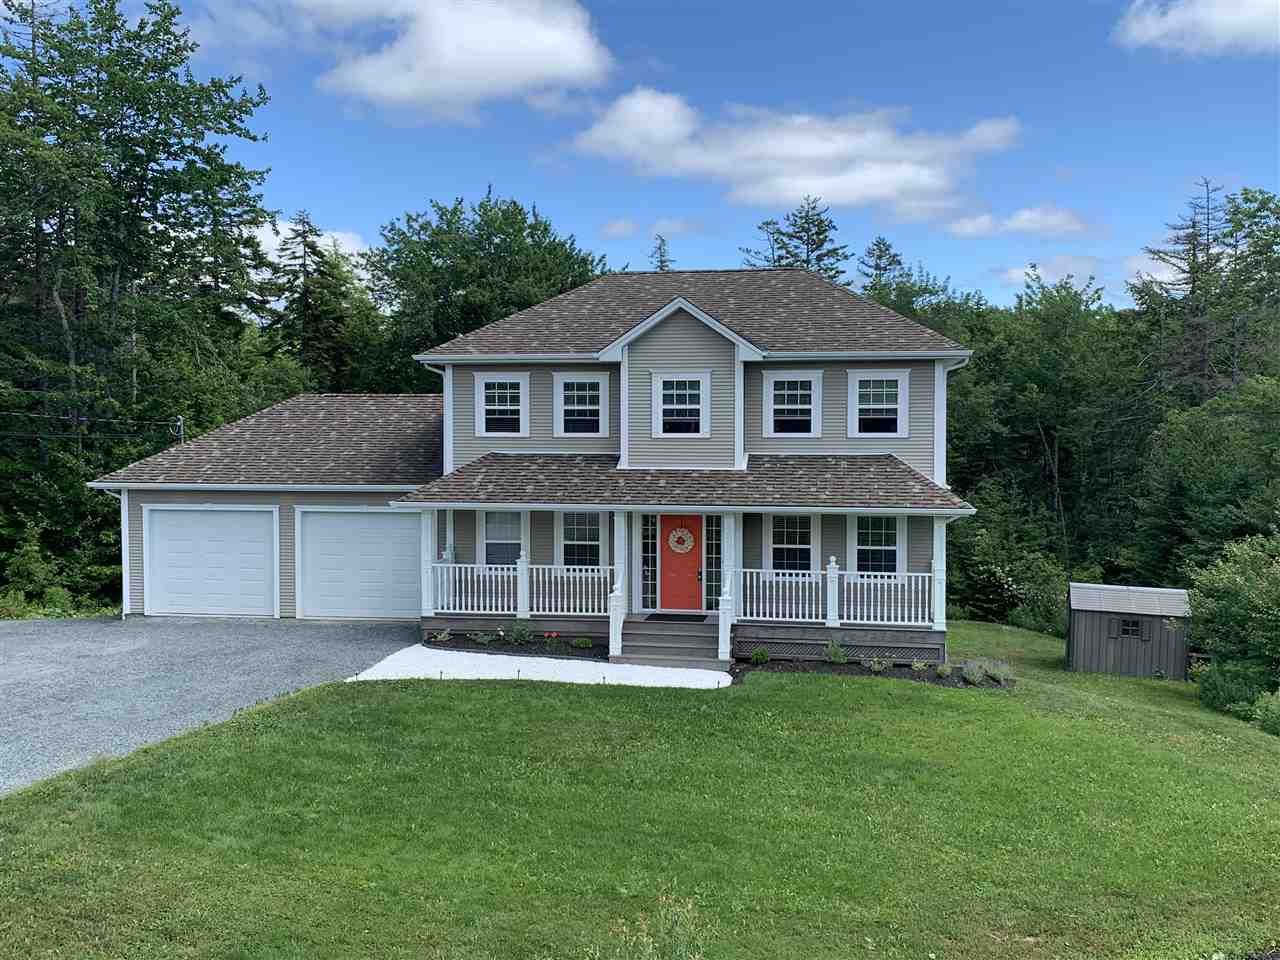 Main Photo: 235 Capilano Drive in Windsor Junction: 30-Waverley, Fall River, Oakfield Residential for sale (Halifax-Dartmouth)  : MLS®# 202008873